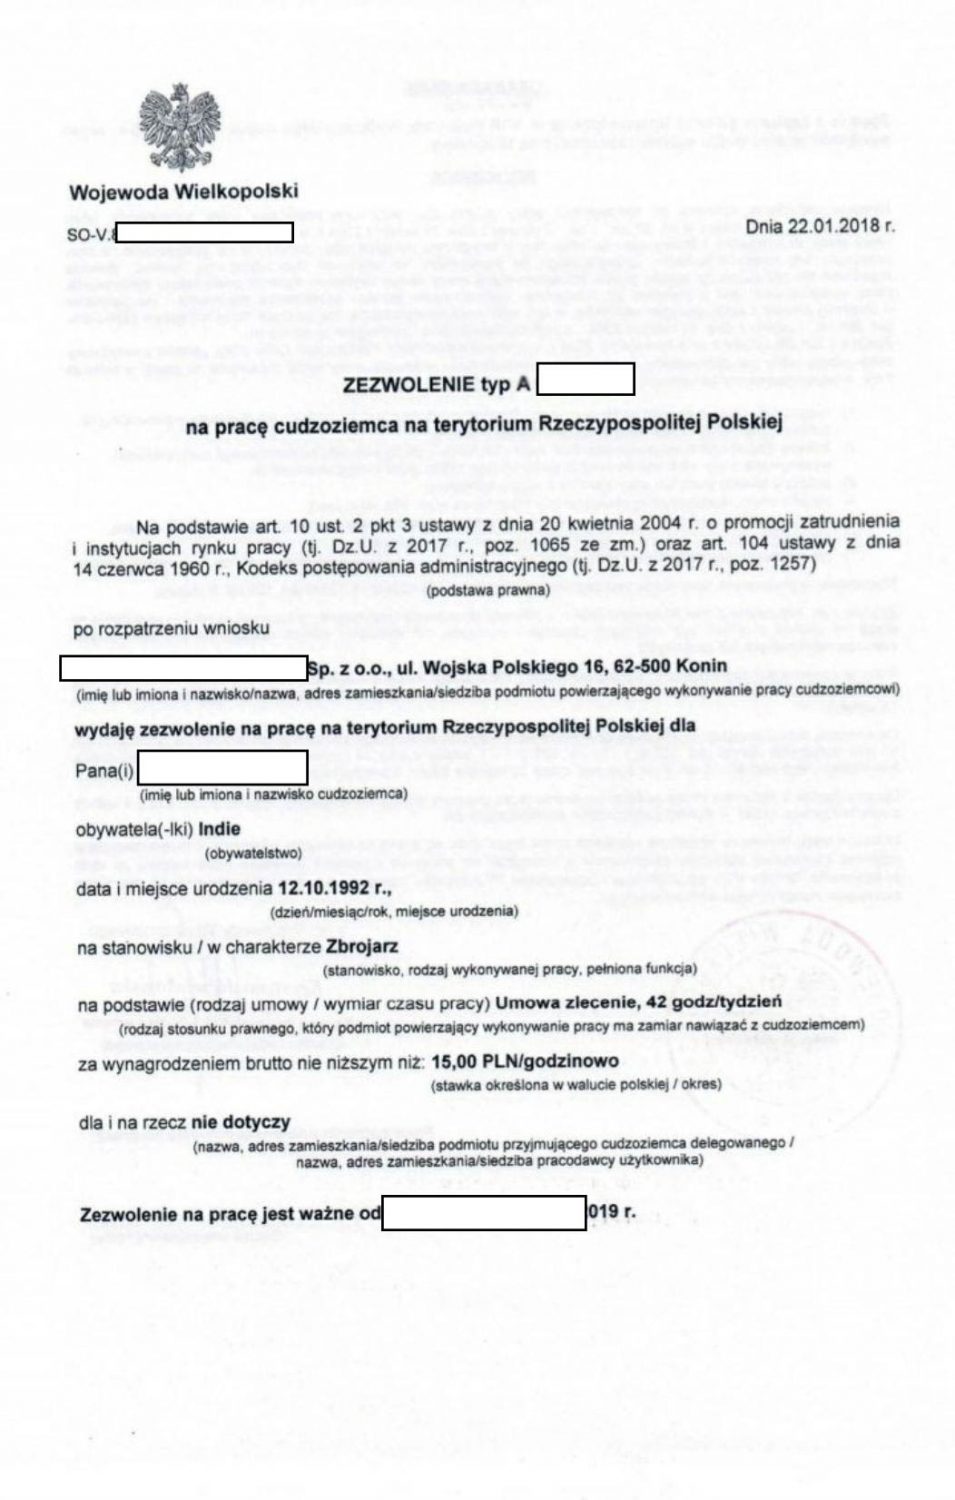 A sample work permit document from Poland that foreigners must have in order to be able to work legally in this country.